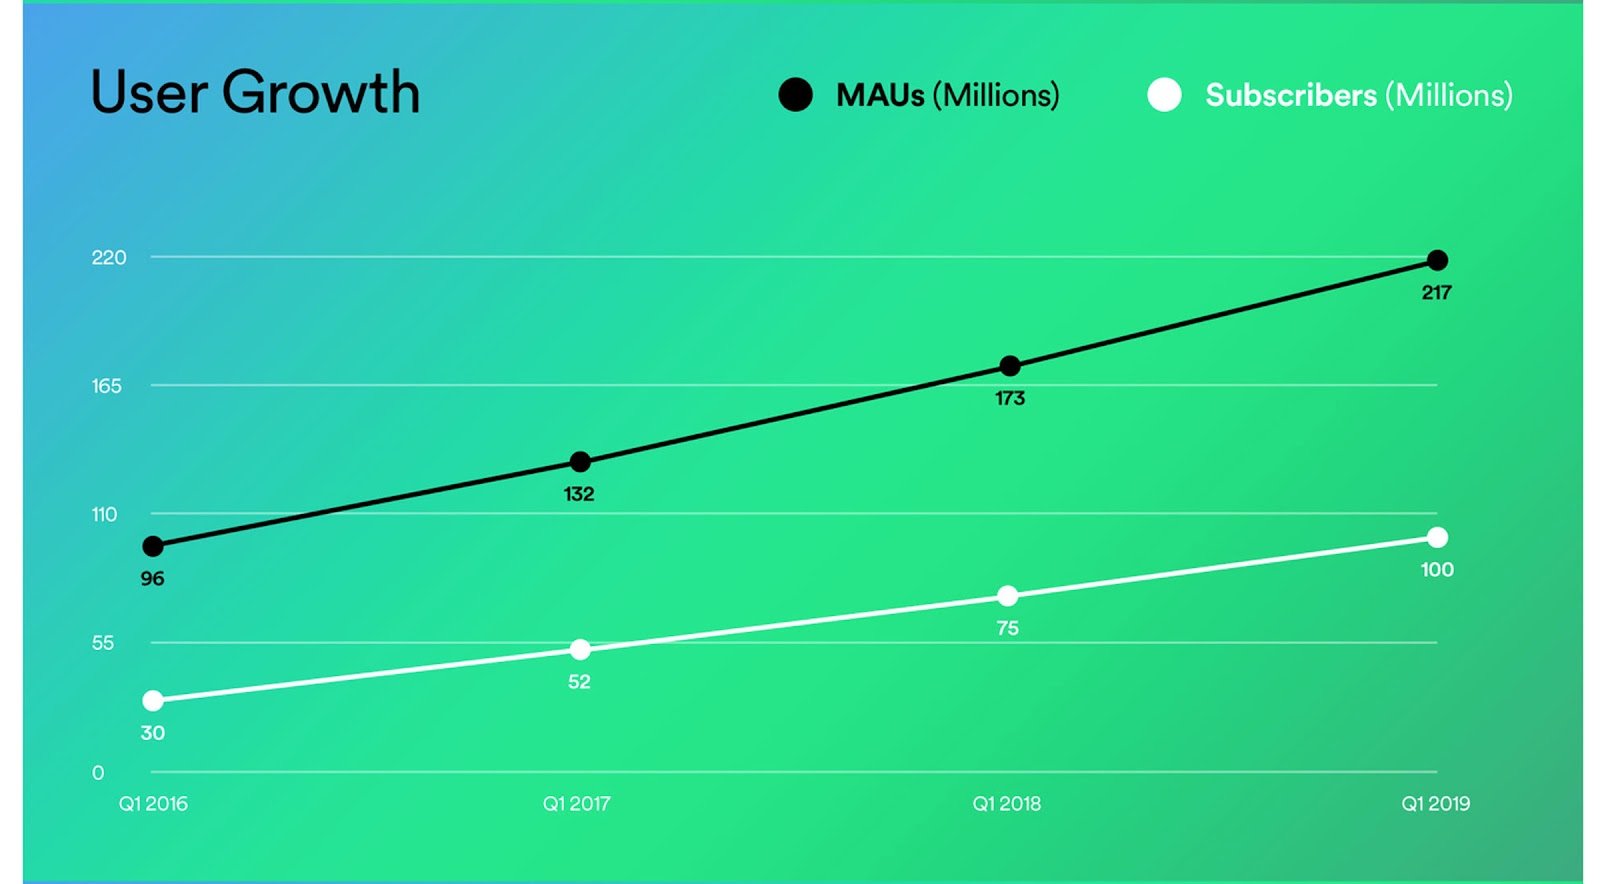 Spotify now has 100 million paid subscribers and 217 million monthly active users in total; product sampling marketing 